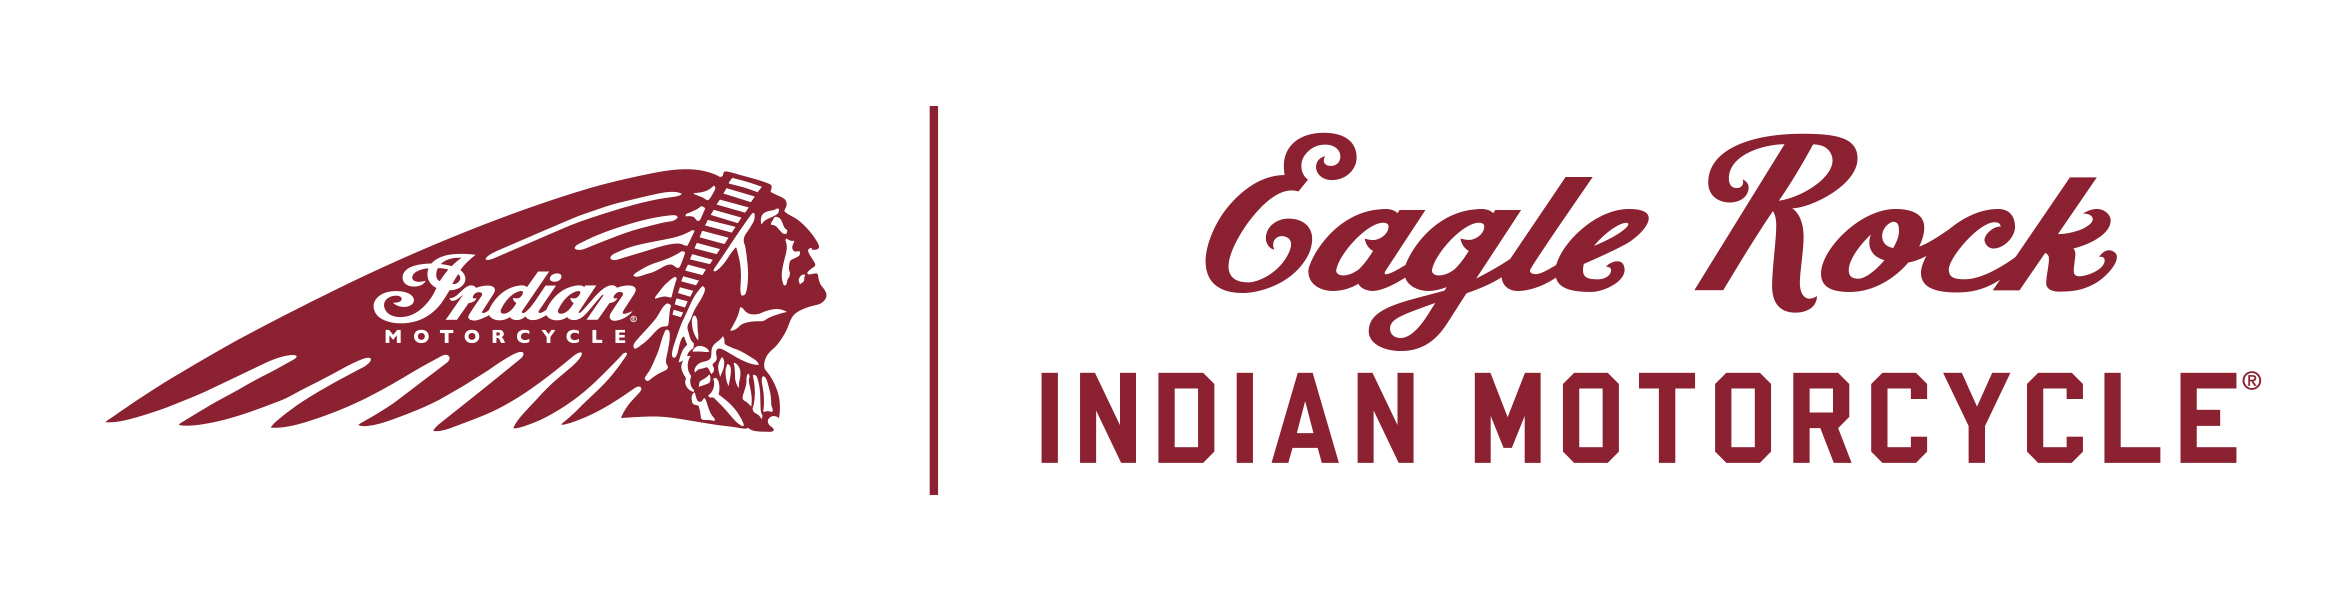 Eagle Rock Indian Motorcycle